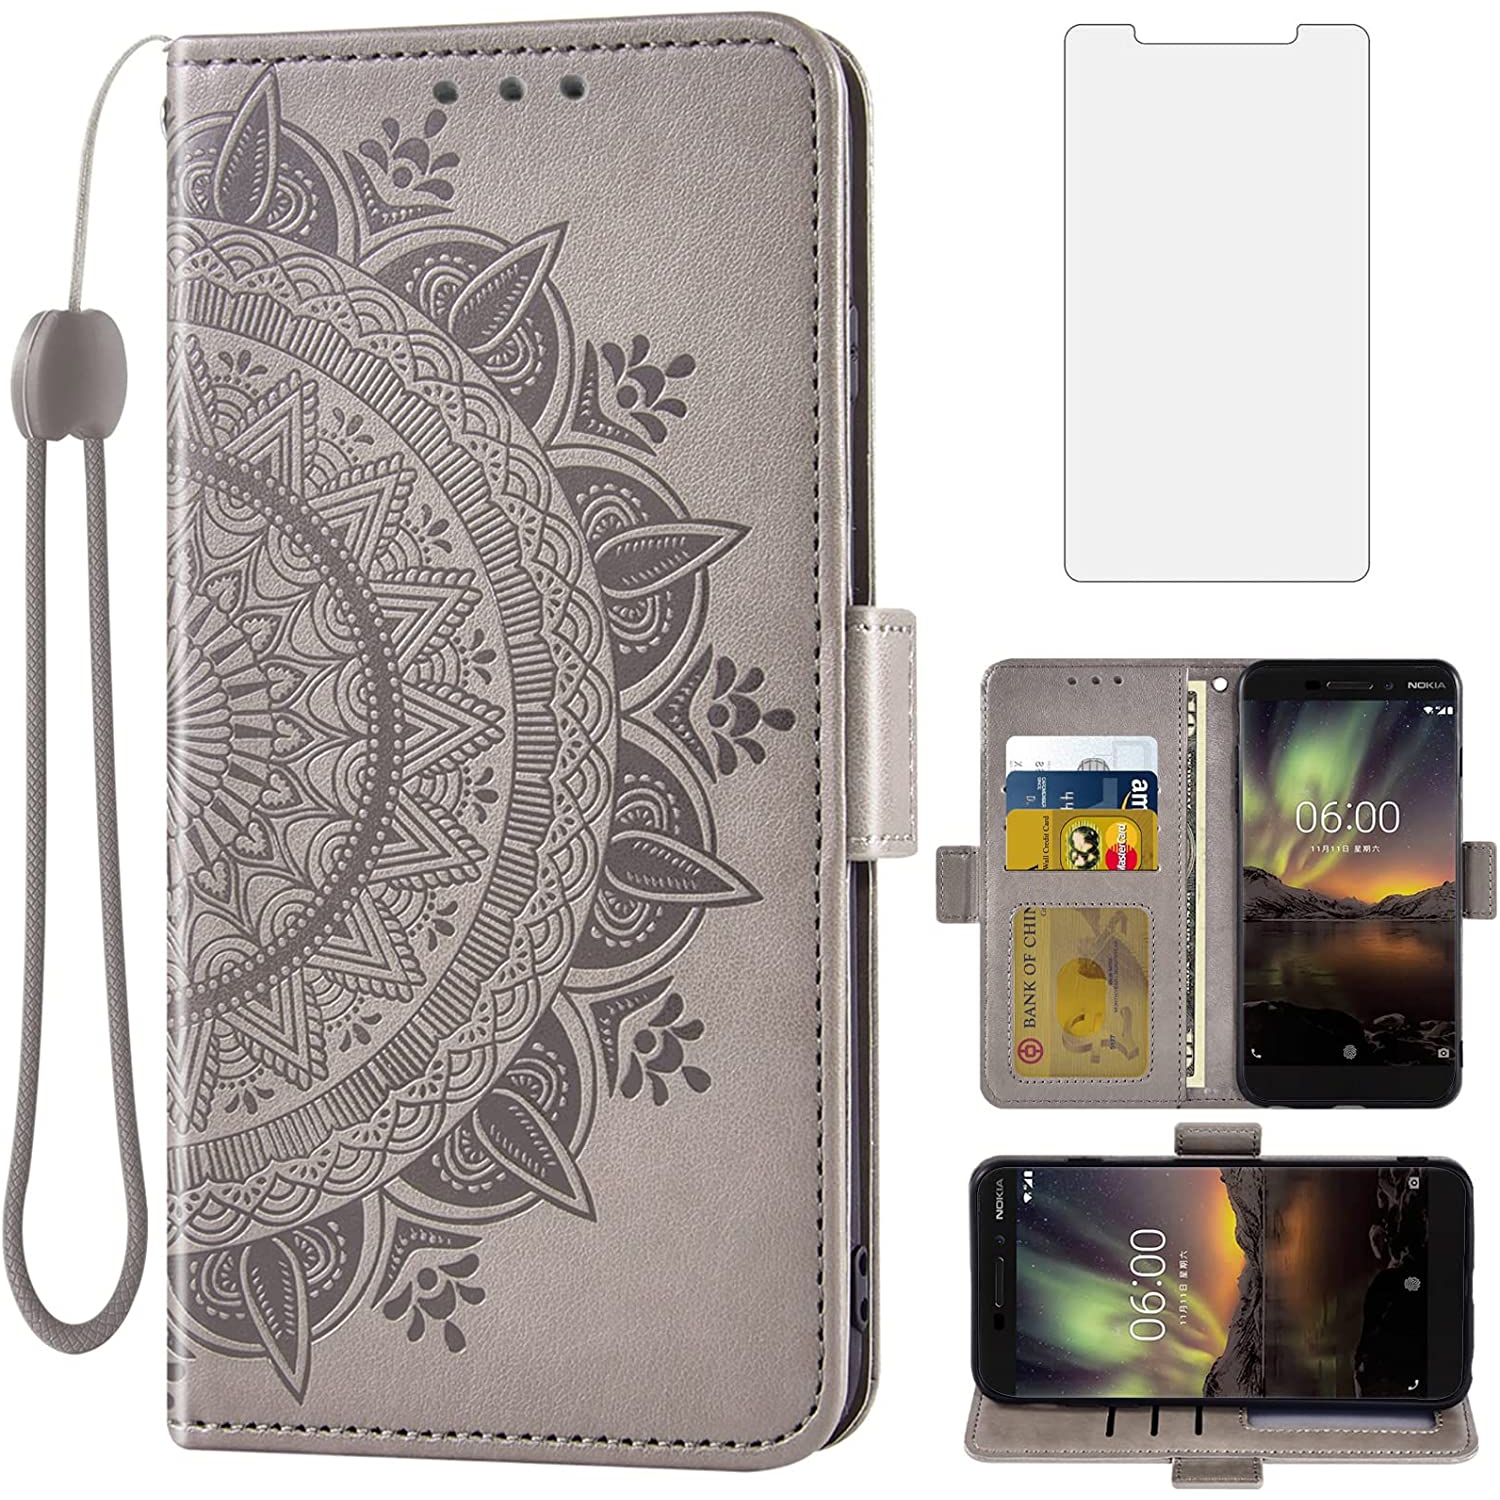 Compatible with Nokia 6.1 2018 Wallet Case and Tempered Glass Screen Protector Credit Card Holder Flip Purse